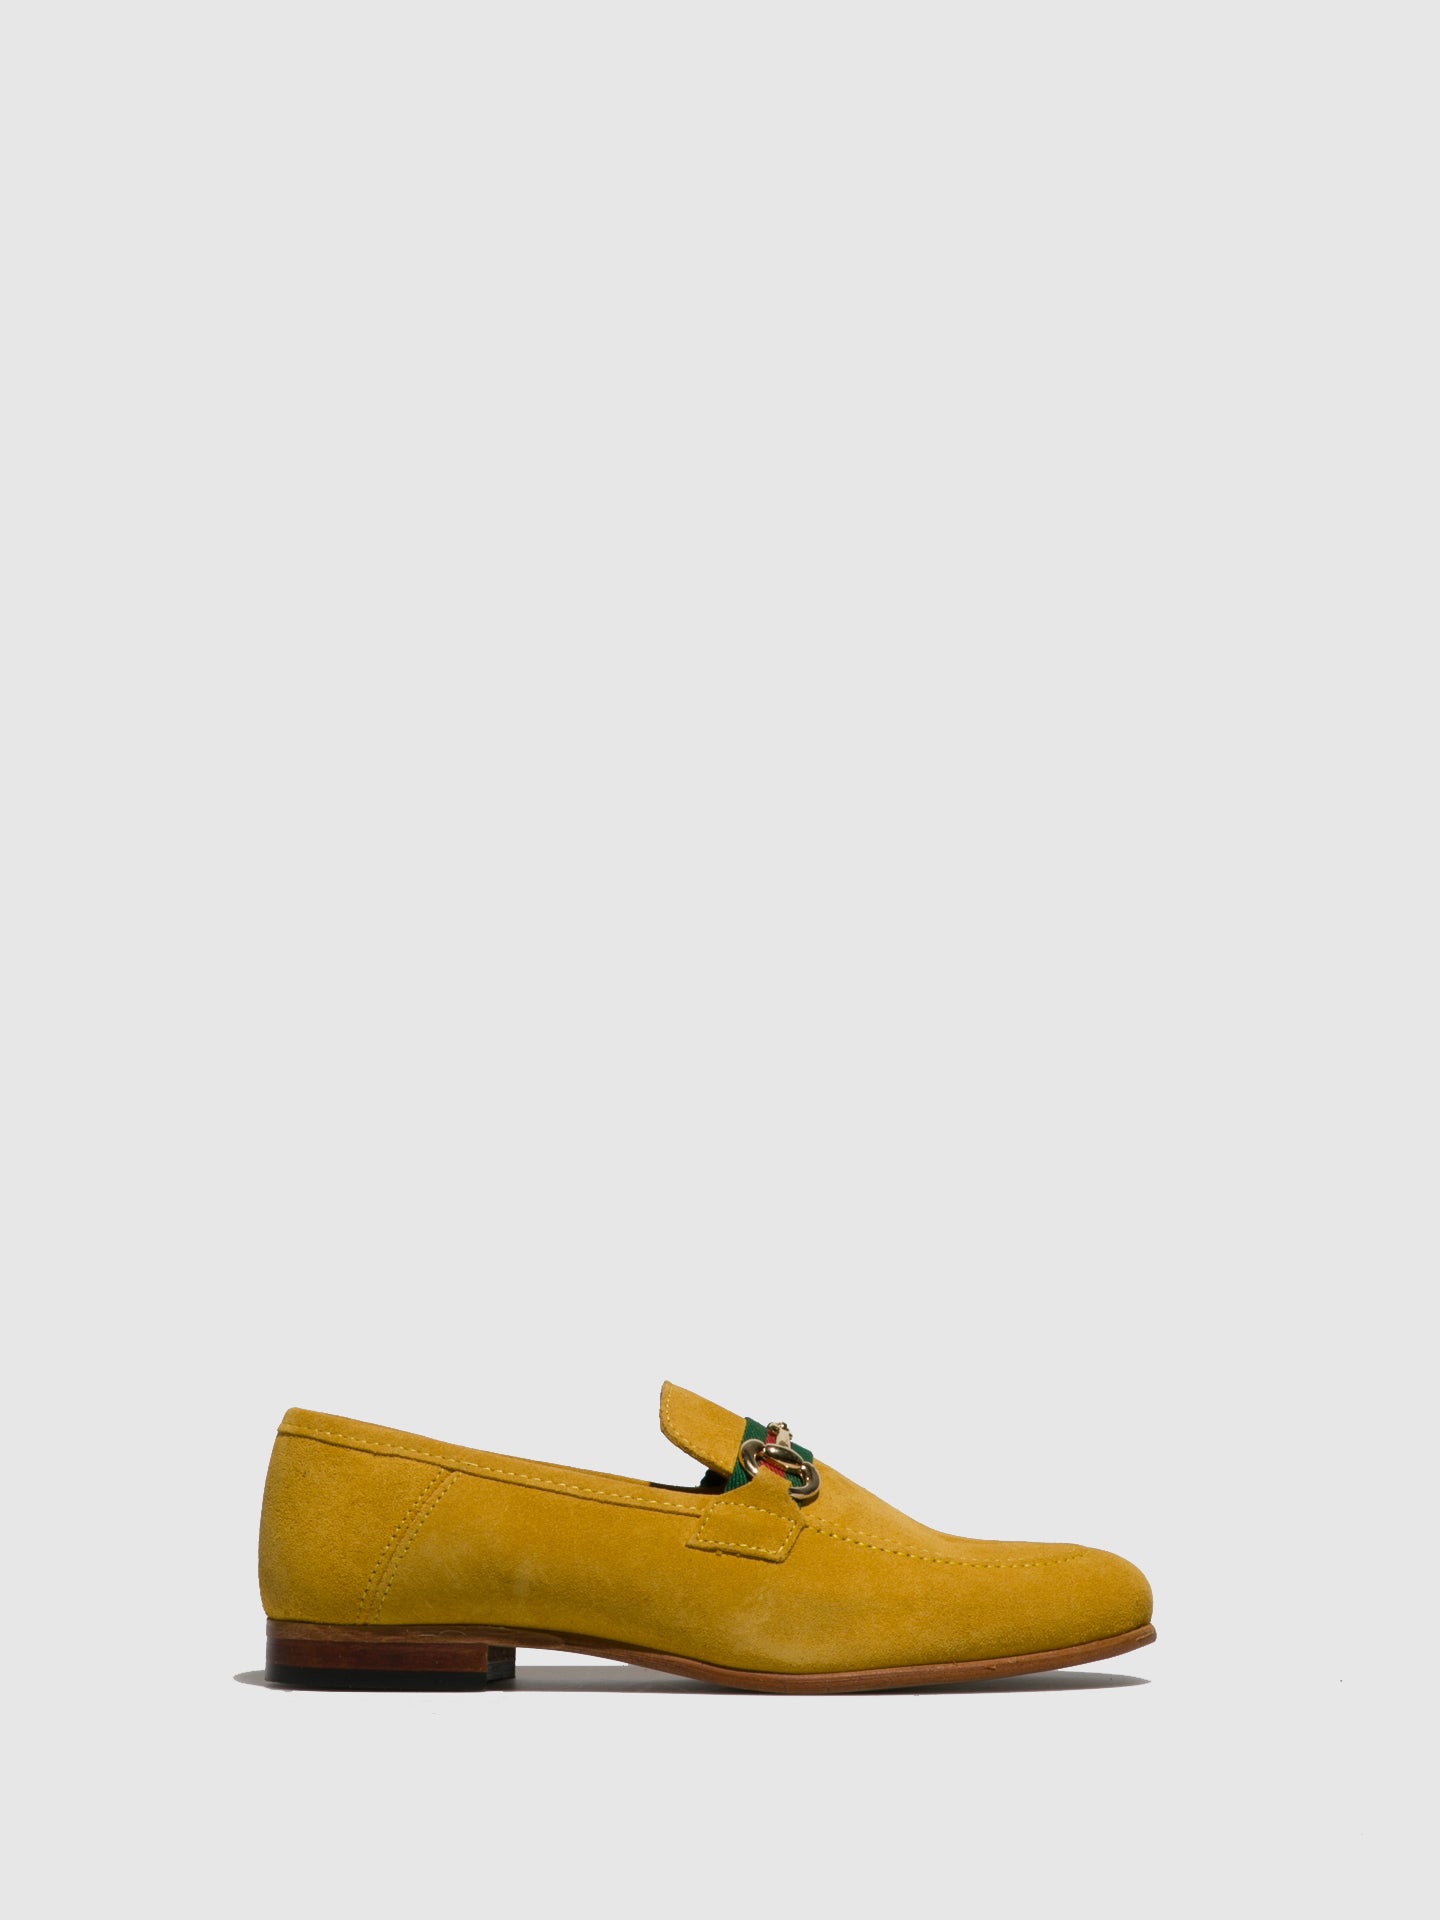 Foreva Yellow Leather Mocassins Shoes